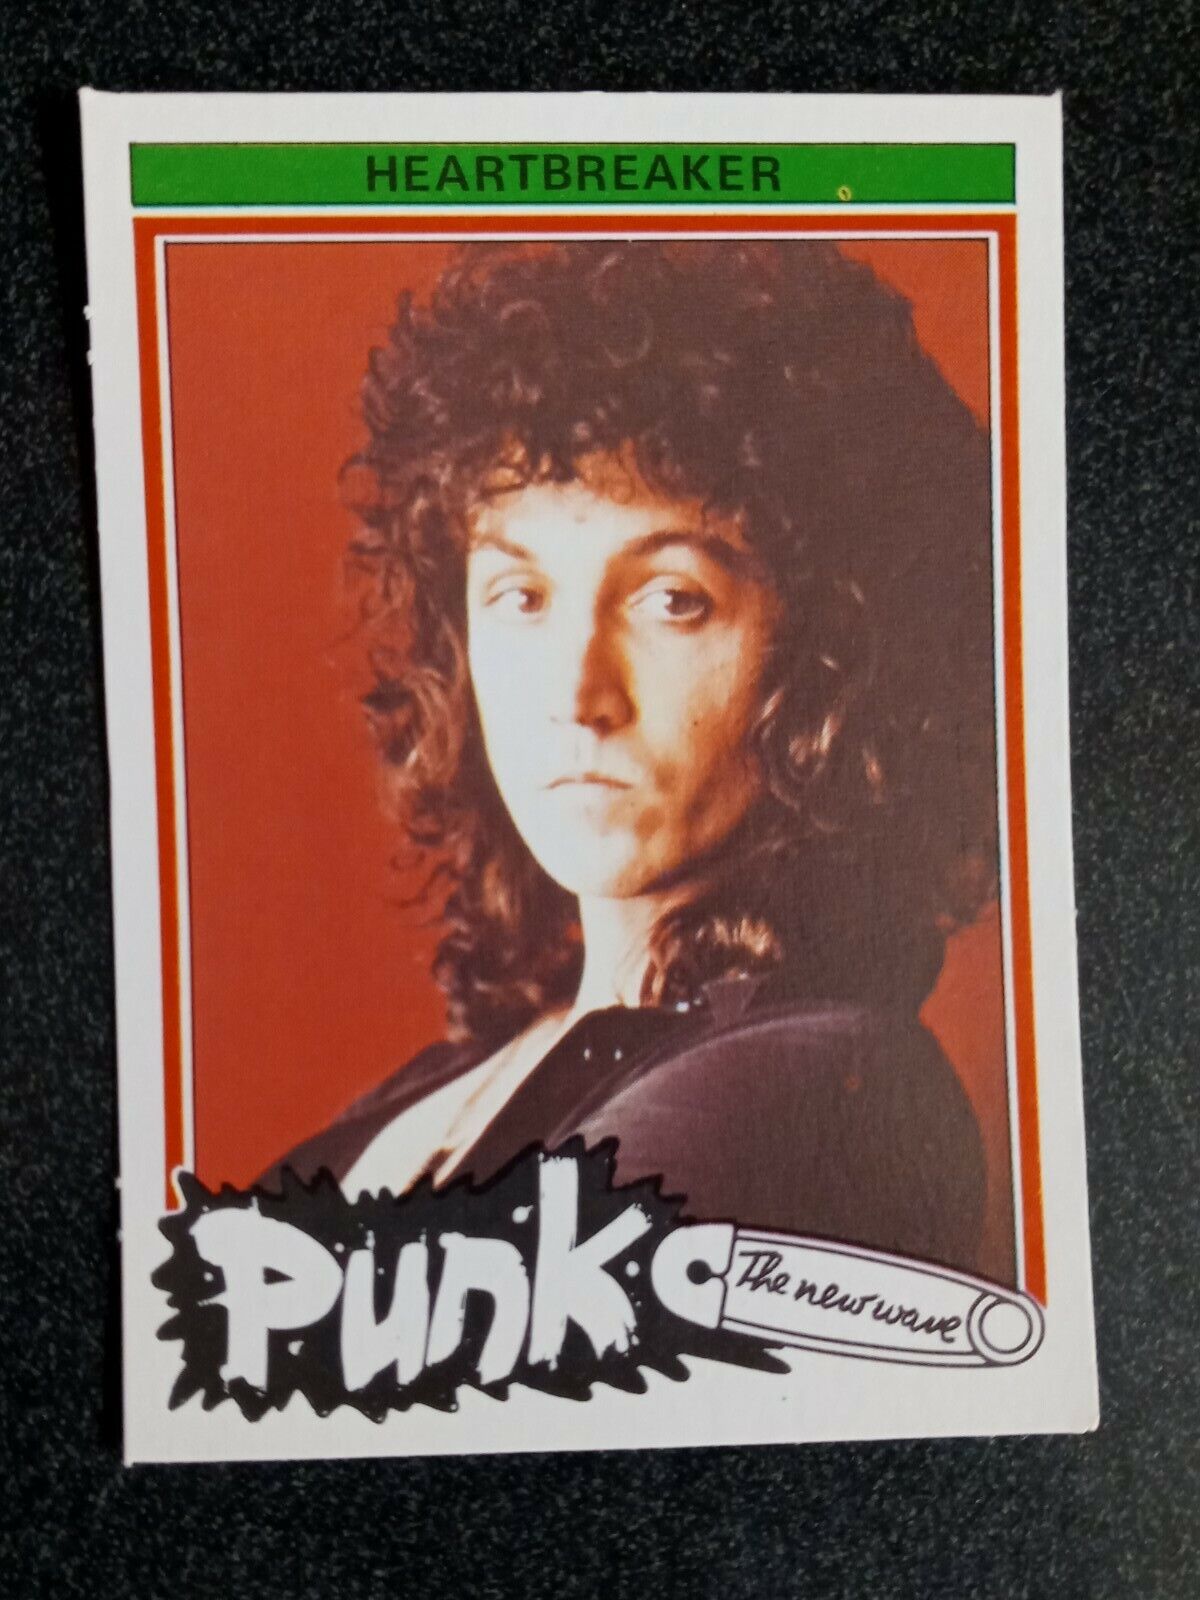 Mike Campbell #2 1977 monty PUNK ROOKIE CARD tom petty AND THE HEARTBREAKERS